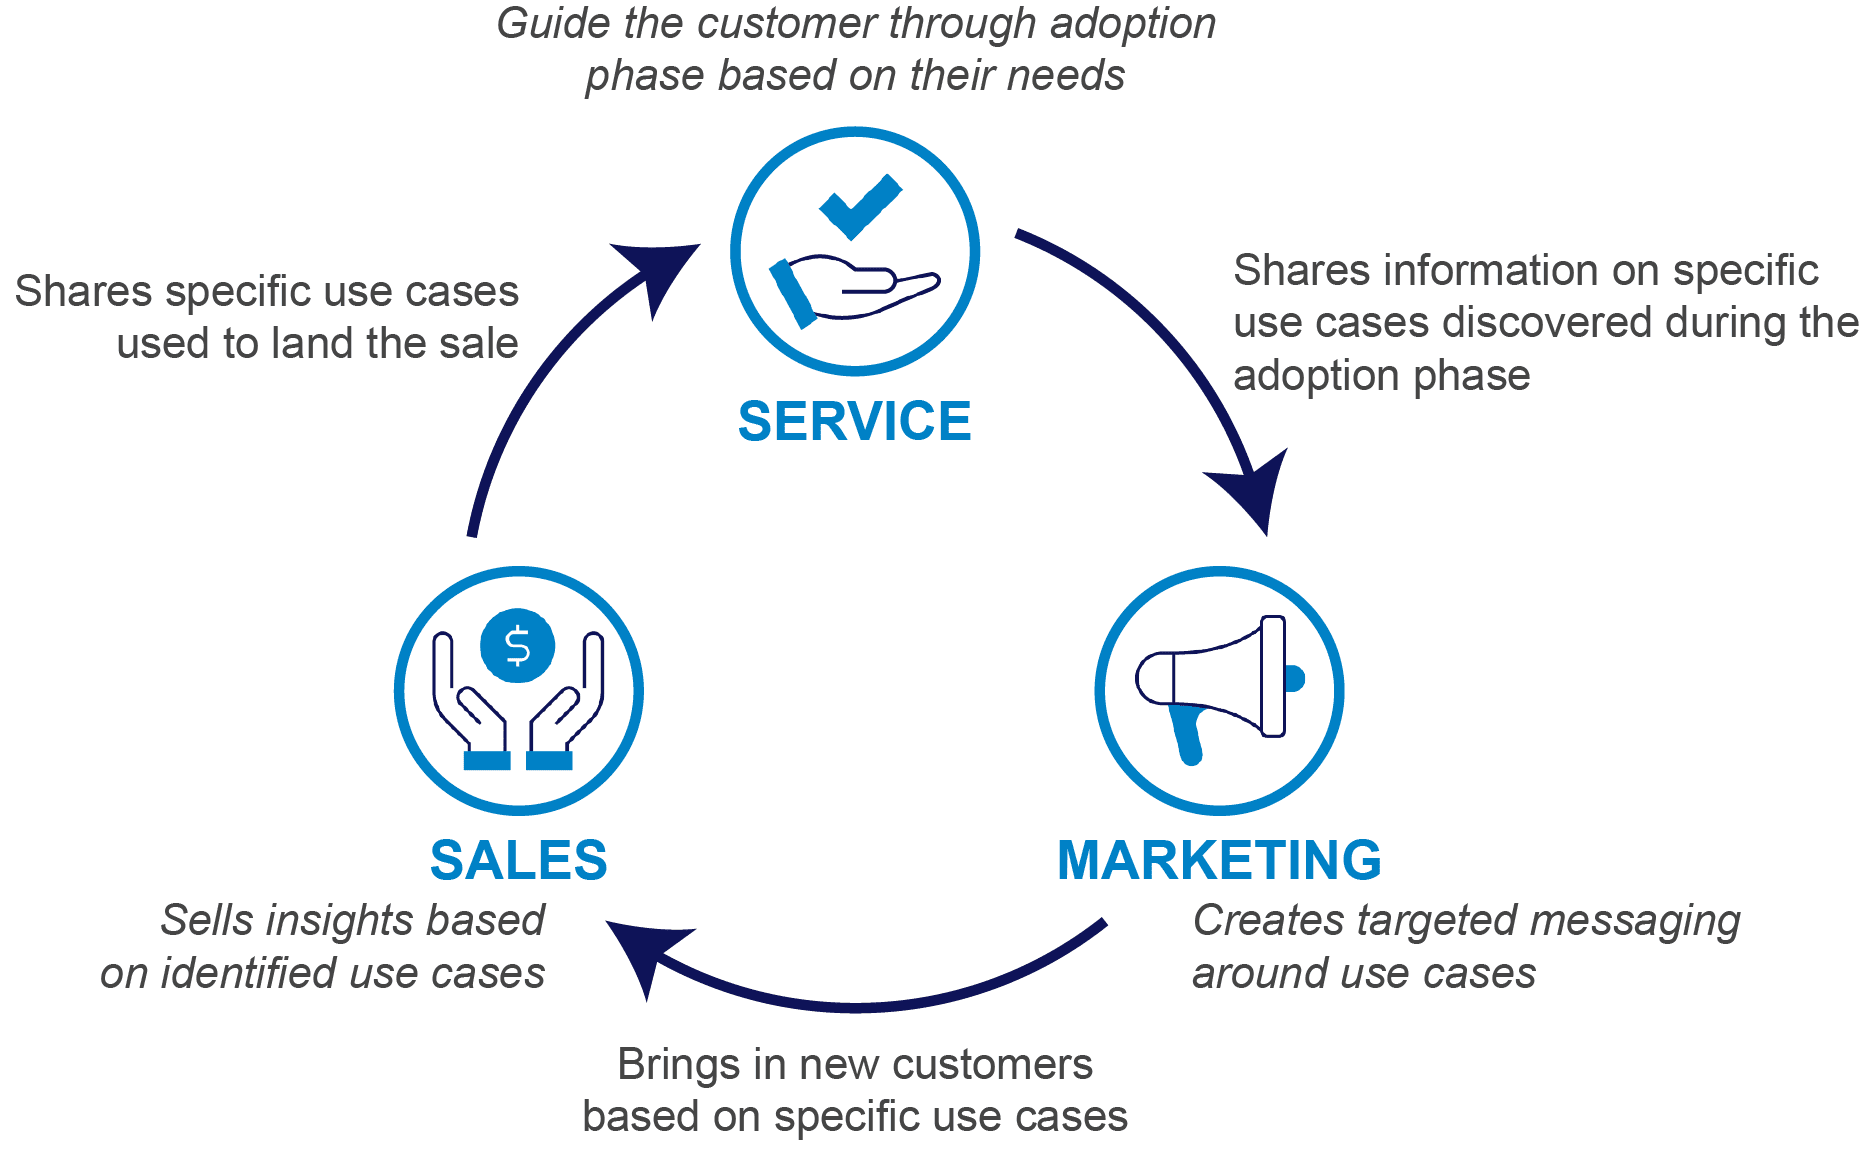 Align Marketing, Sales and Service to Track Use Cases